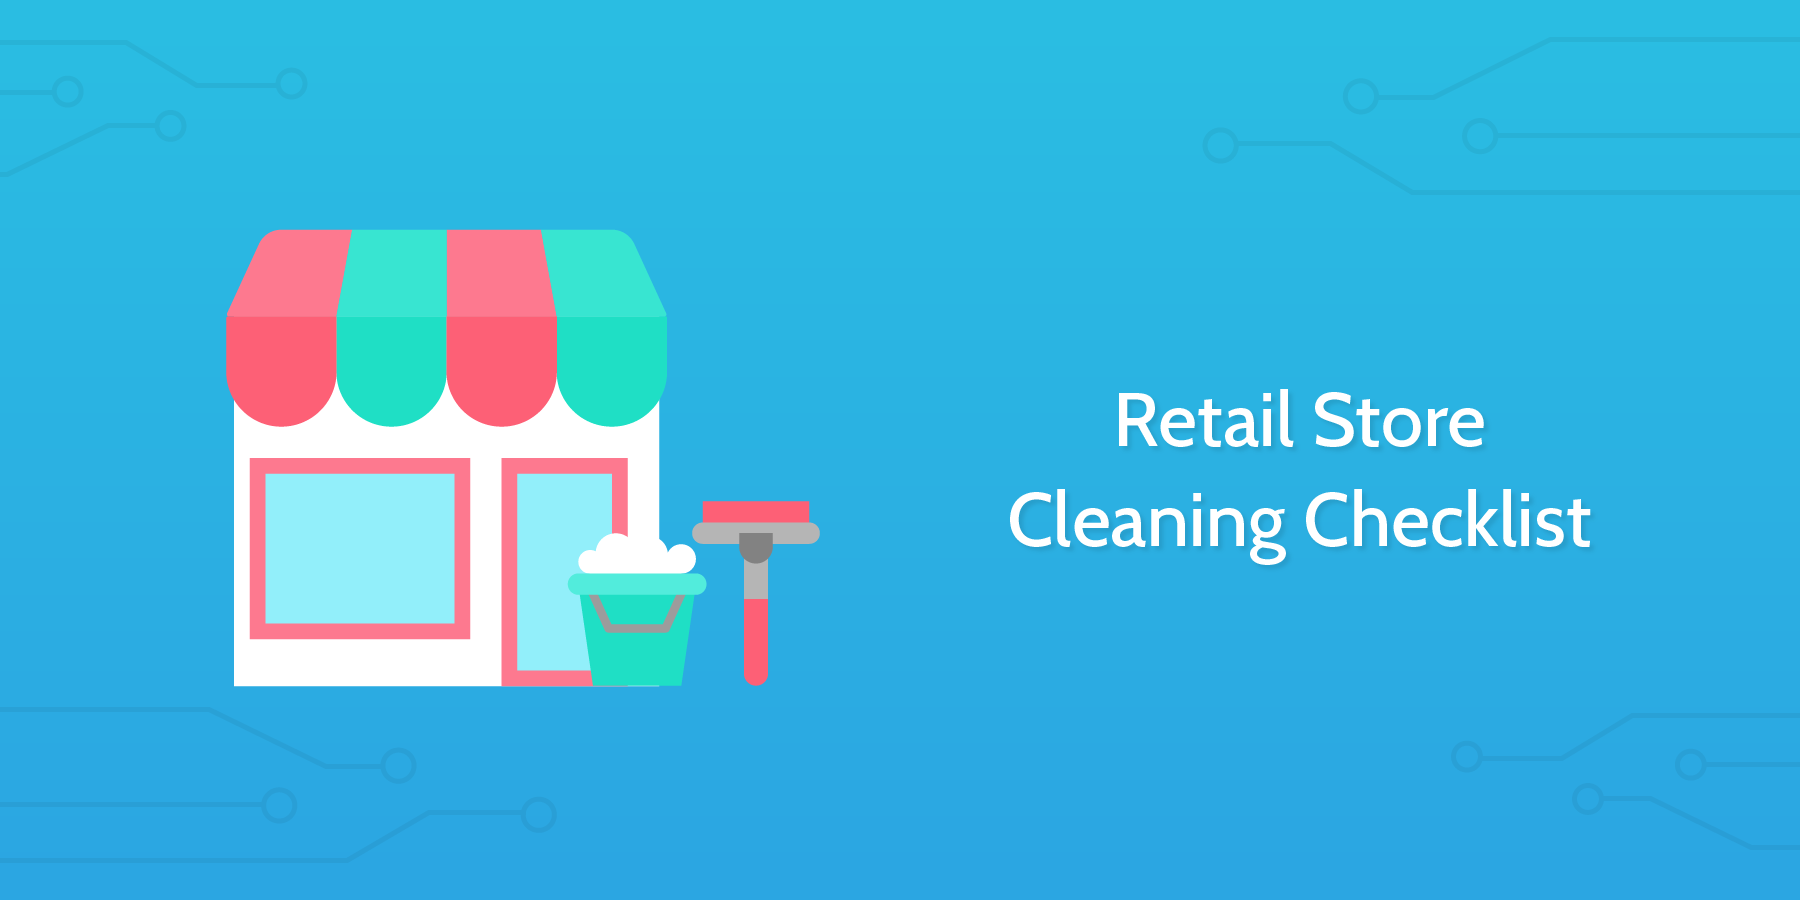 Retail Store Cleaning Checklist